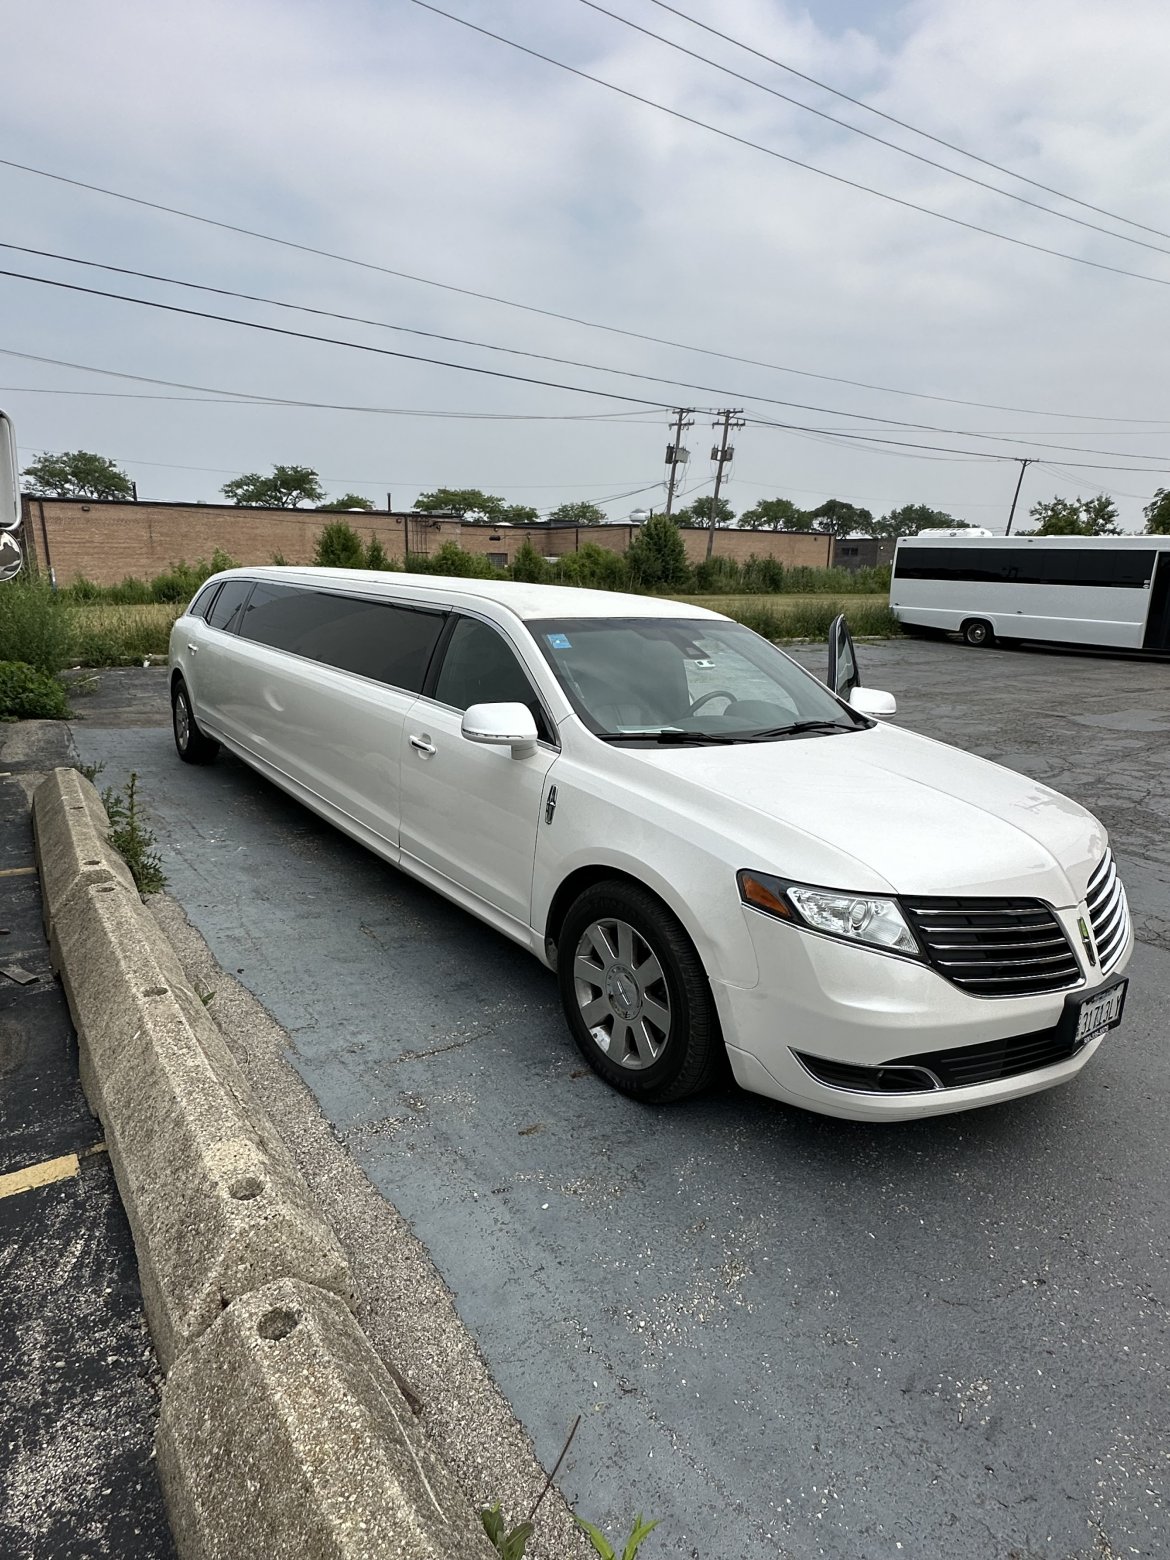 Limousine for sale: 2018 Lincoln mkt by Tiffany